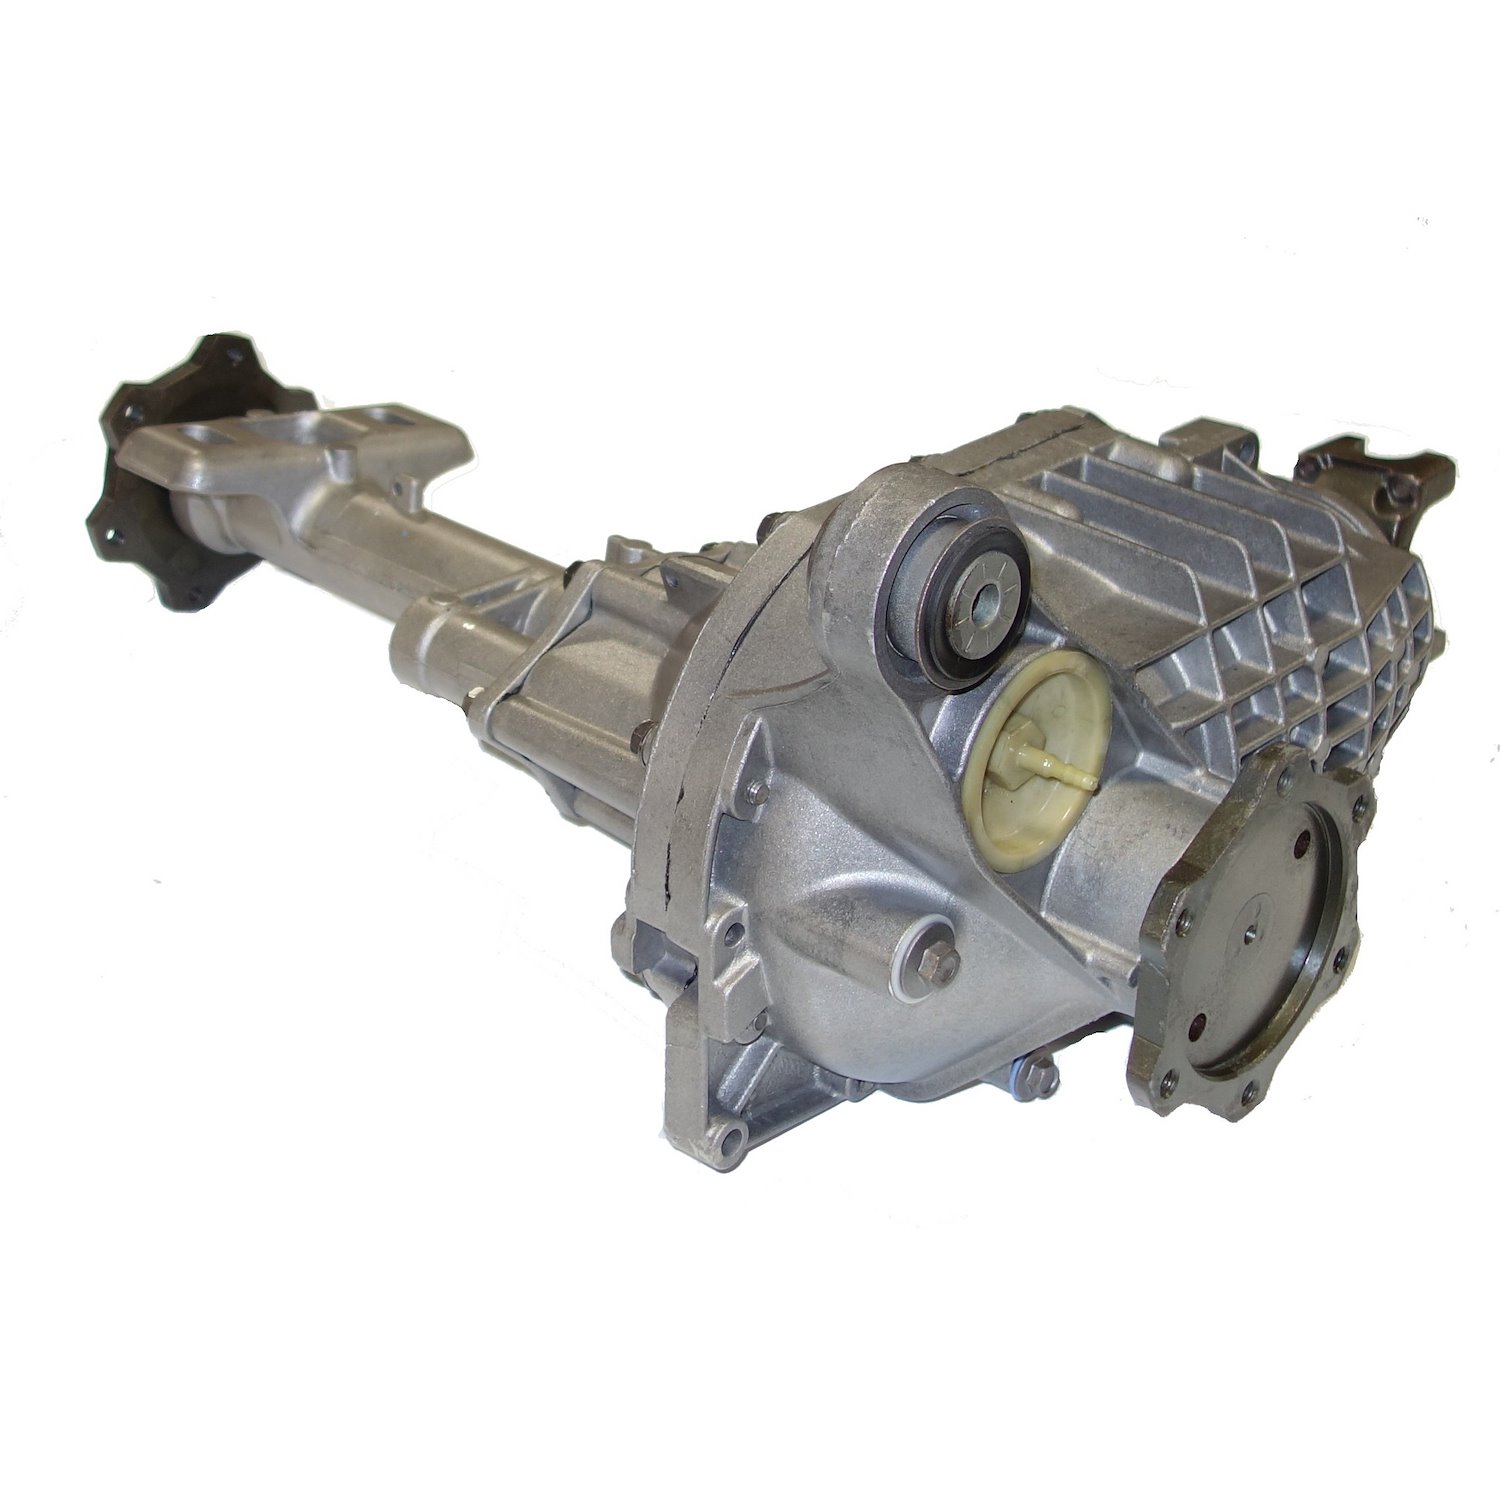 RAA440-1336X1 Front Axle Assembly, Chrysler 8.25 IFS, '99-'07 GM 1500 Pickup ('07 Classic) & Suv, 4.56 Ratio, Open